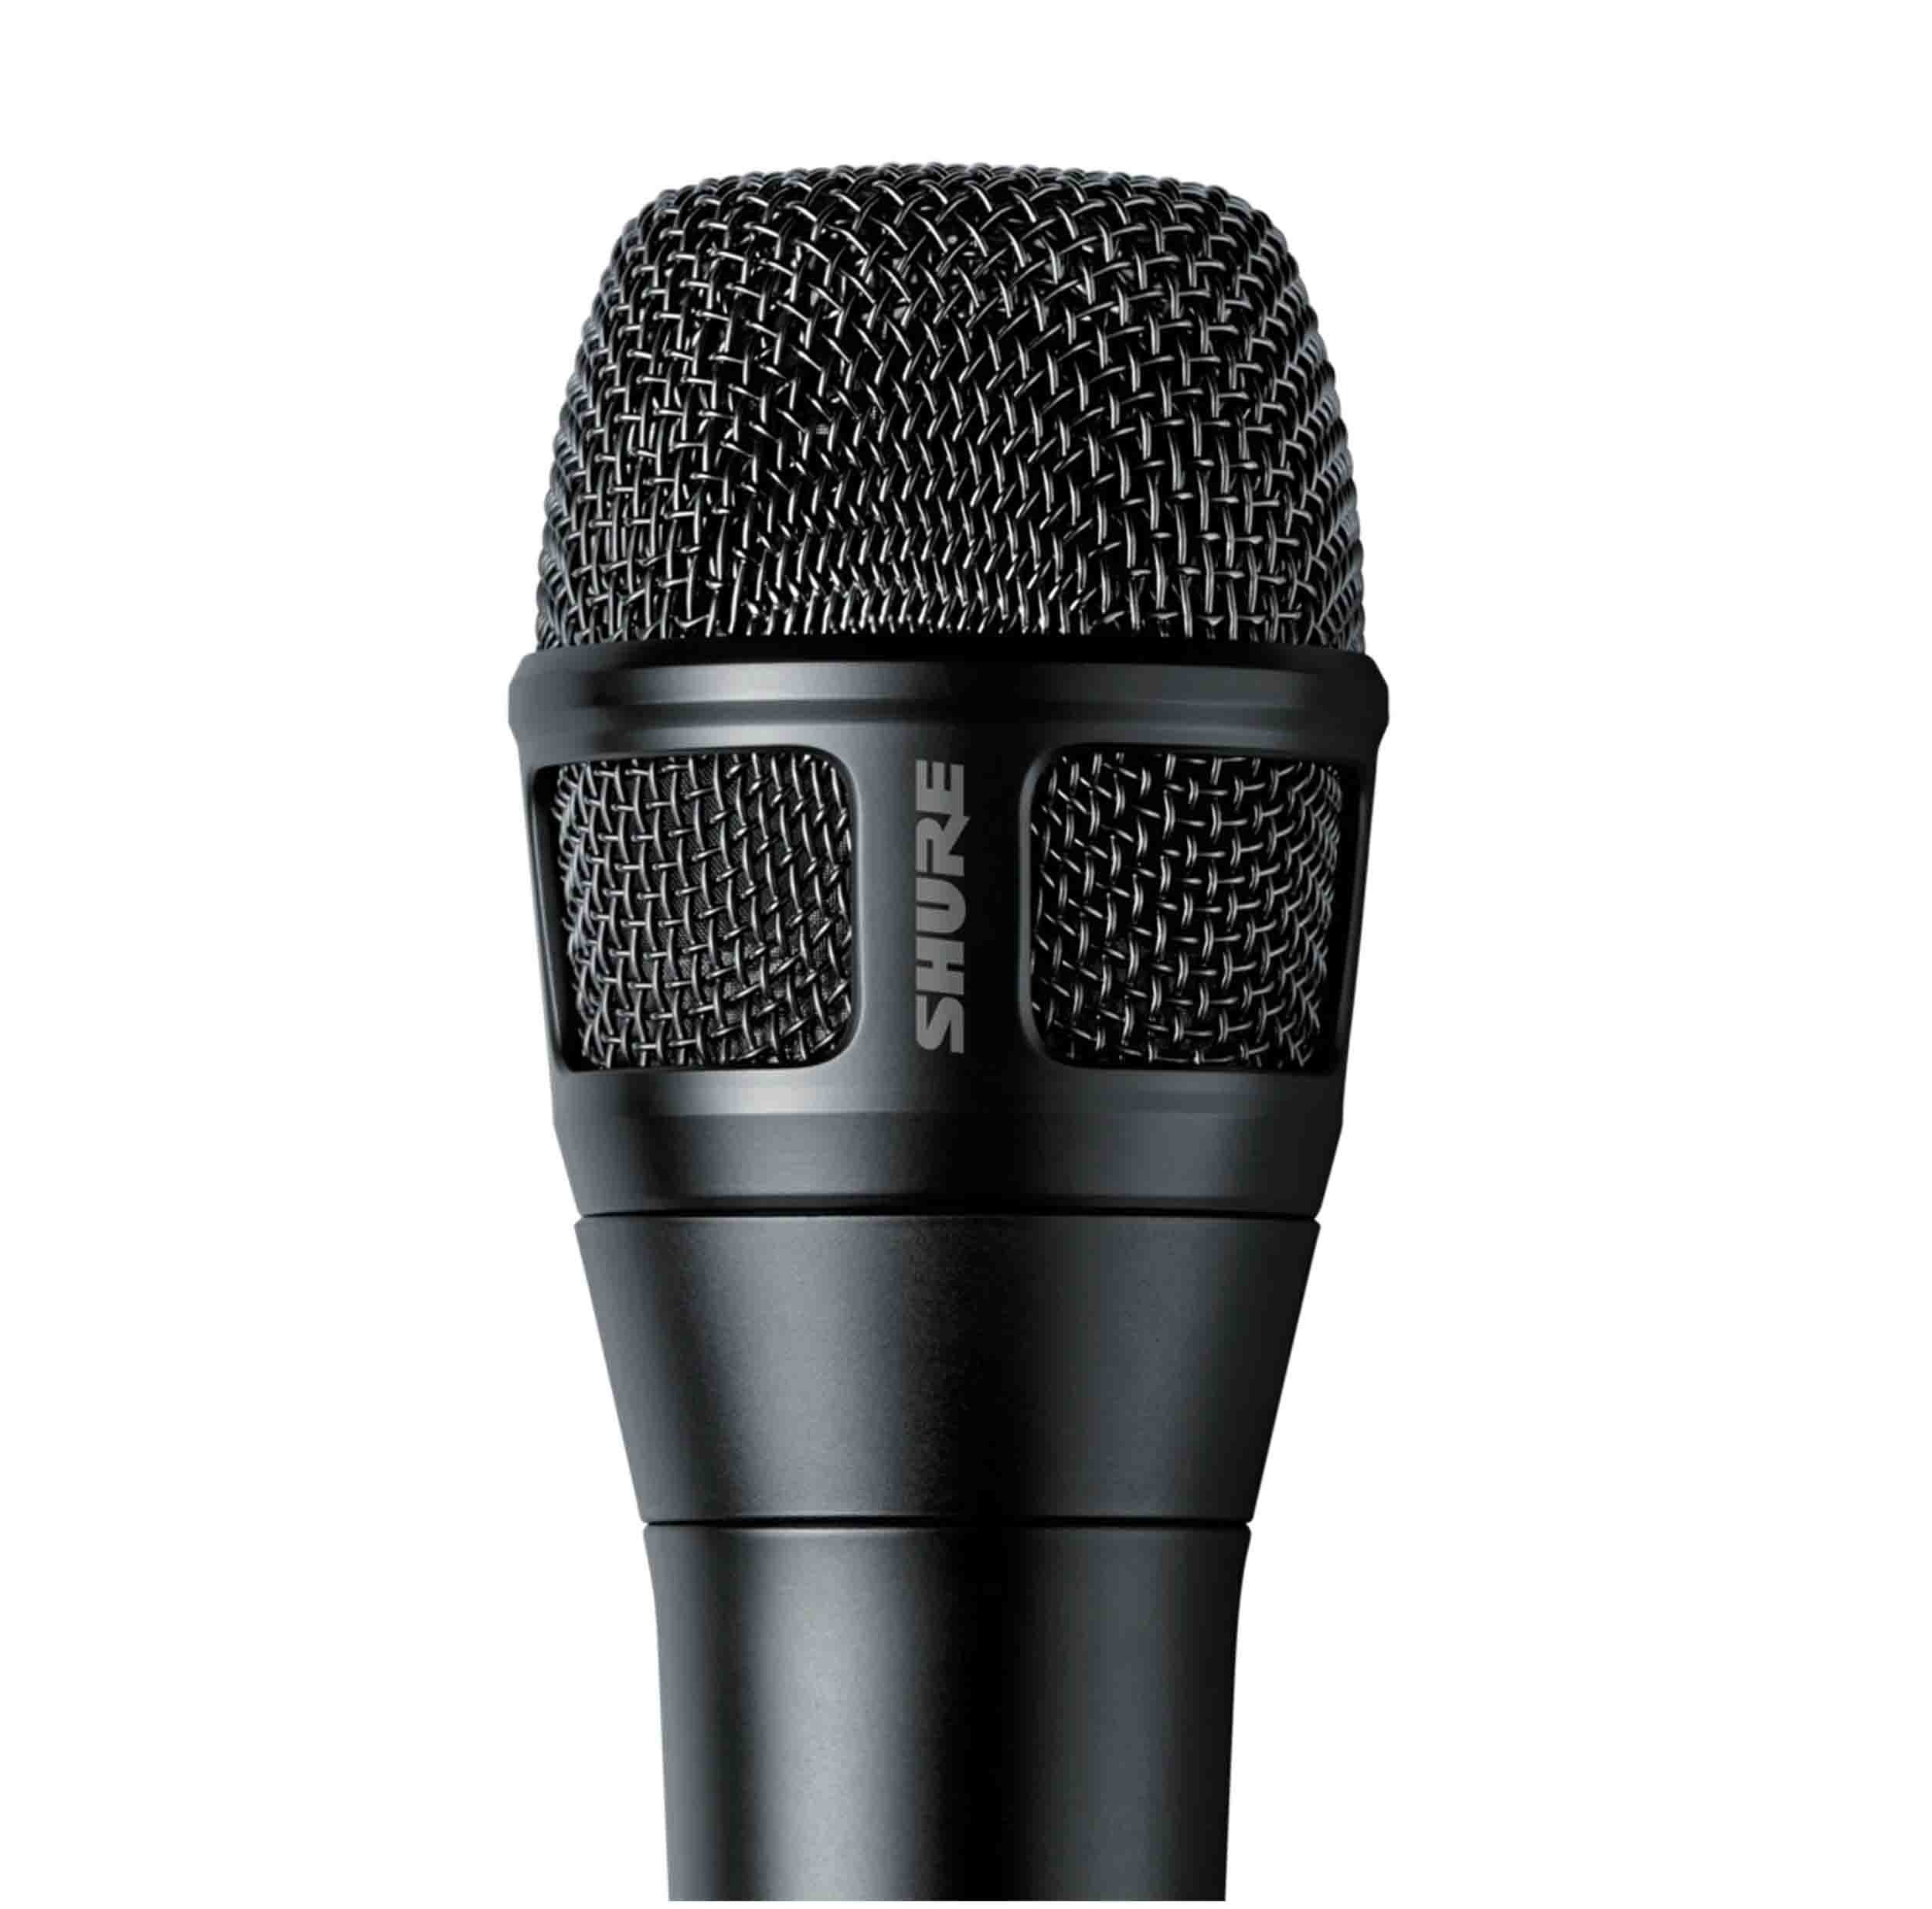 Shure Nexadyne 8/S Supercardioid Dynamic Vocal Microphone with Revonic Transducer - Black by Shure